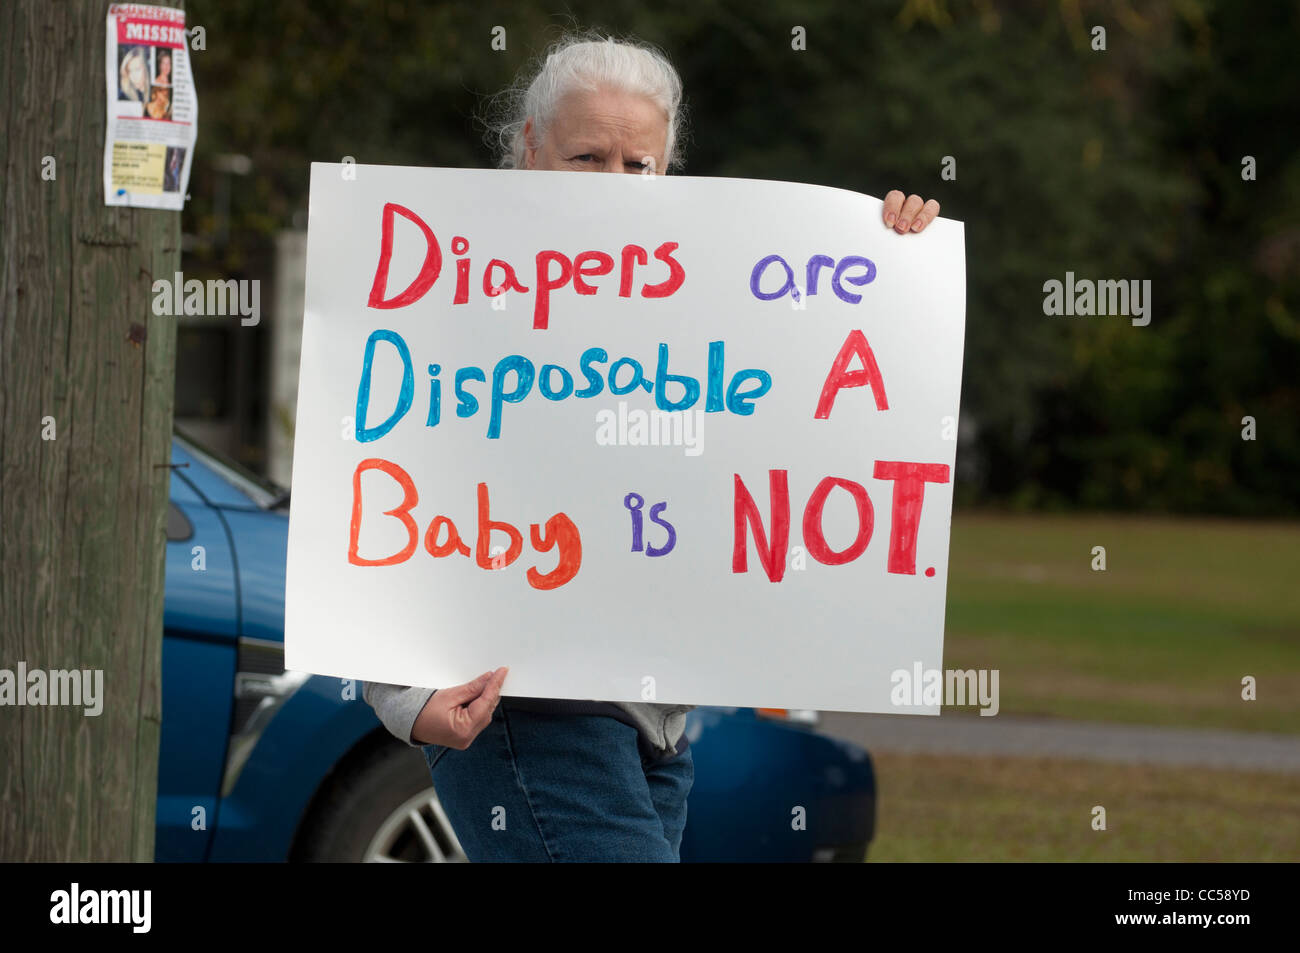 Participants in the annual Walk For Life rally in the small North Florida town of Fort White. Stock Photo